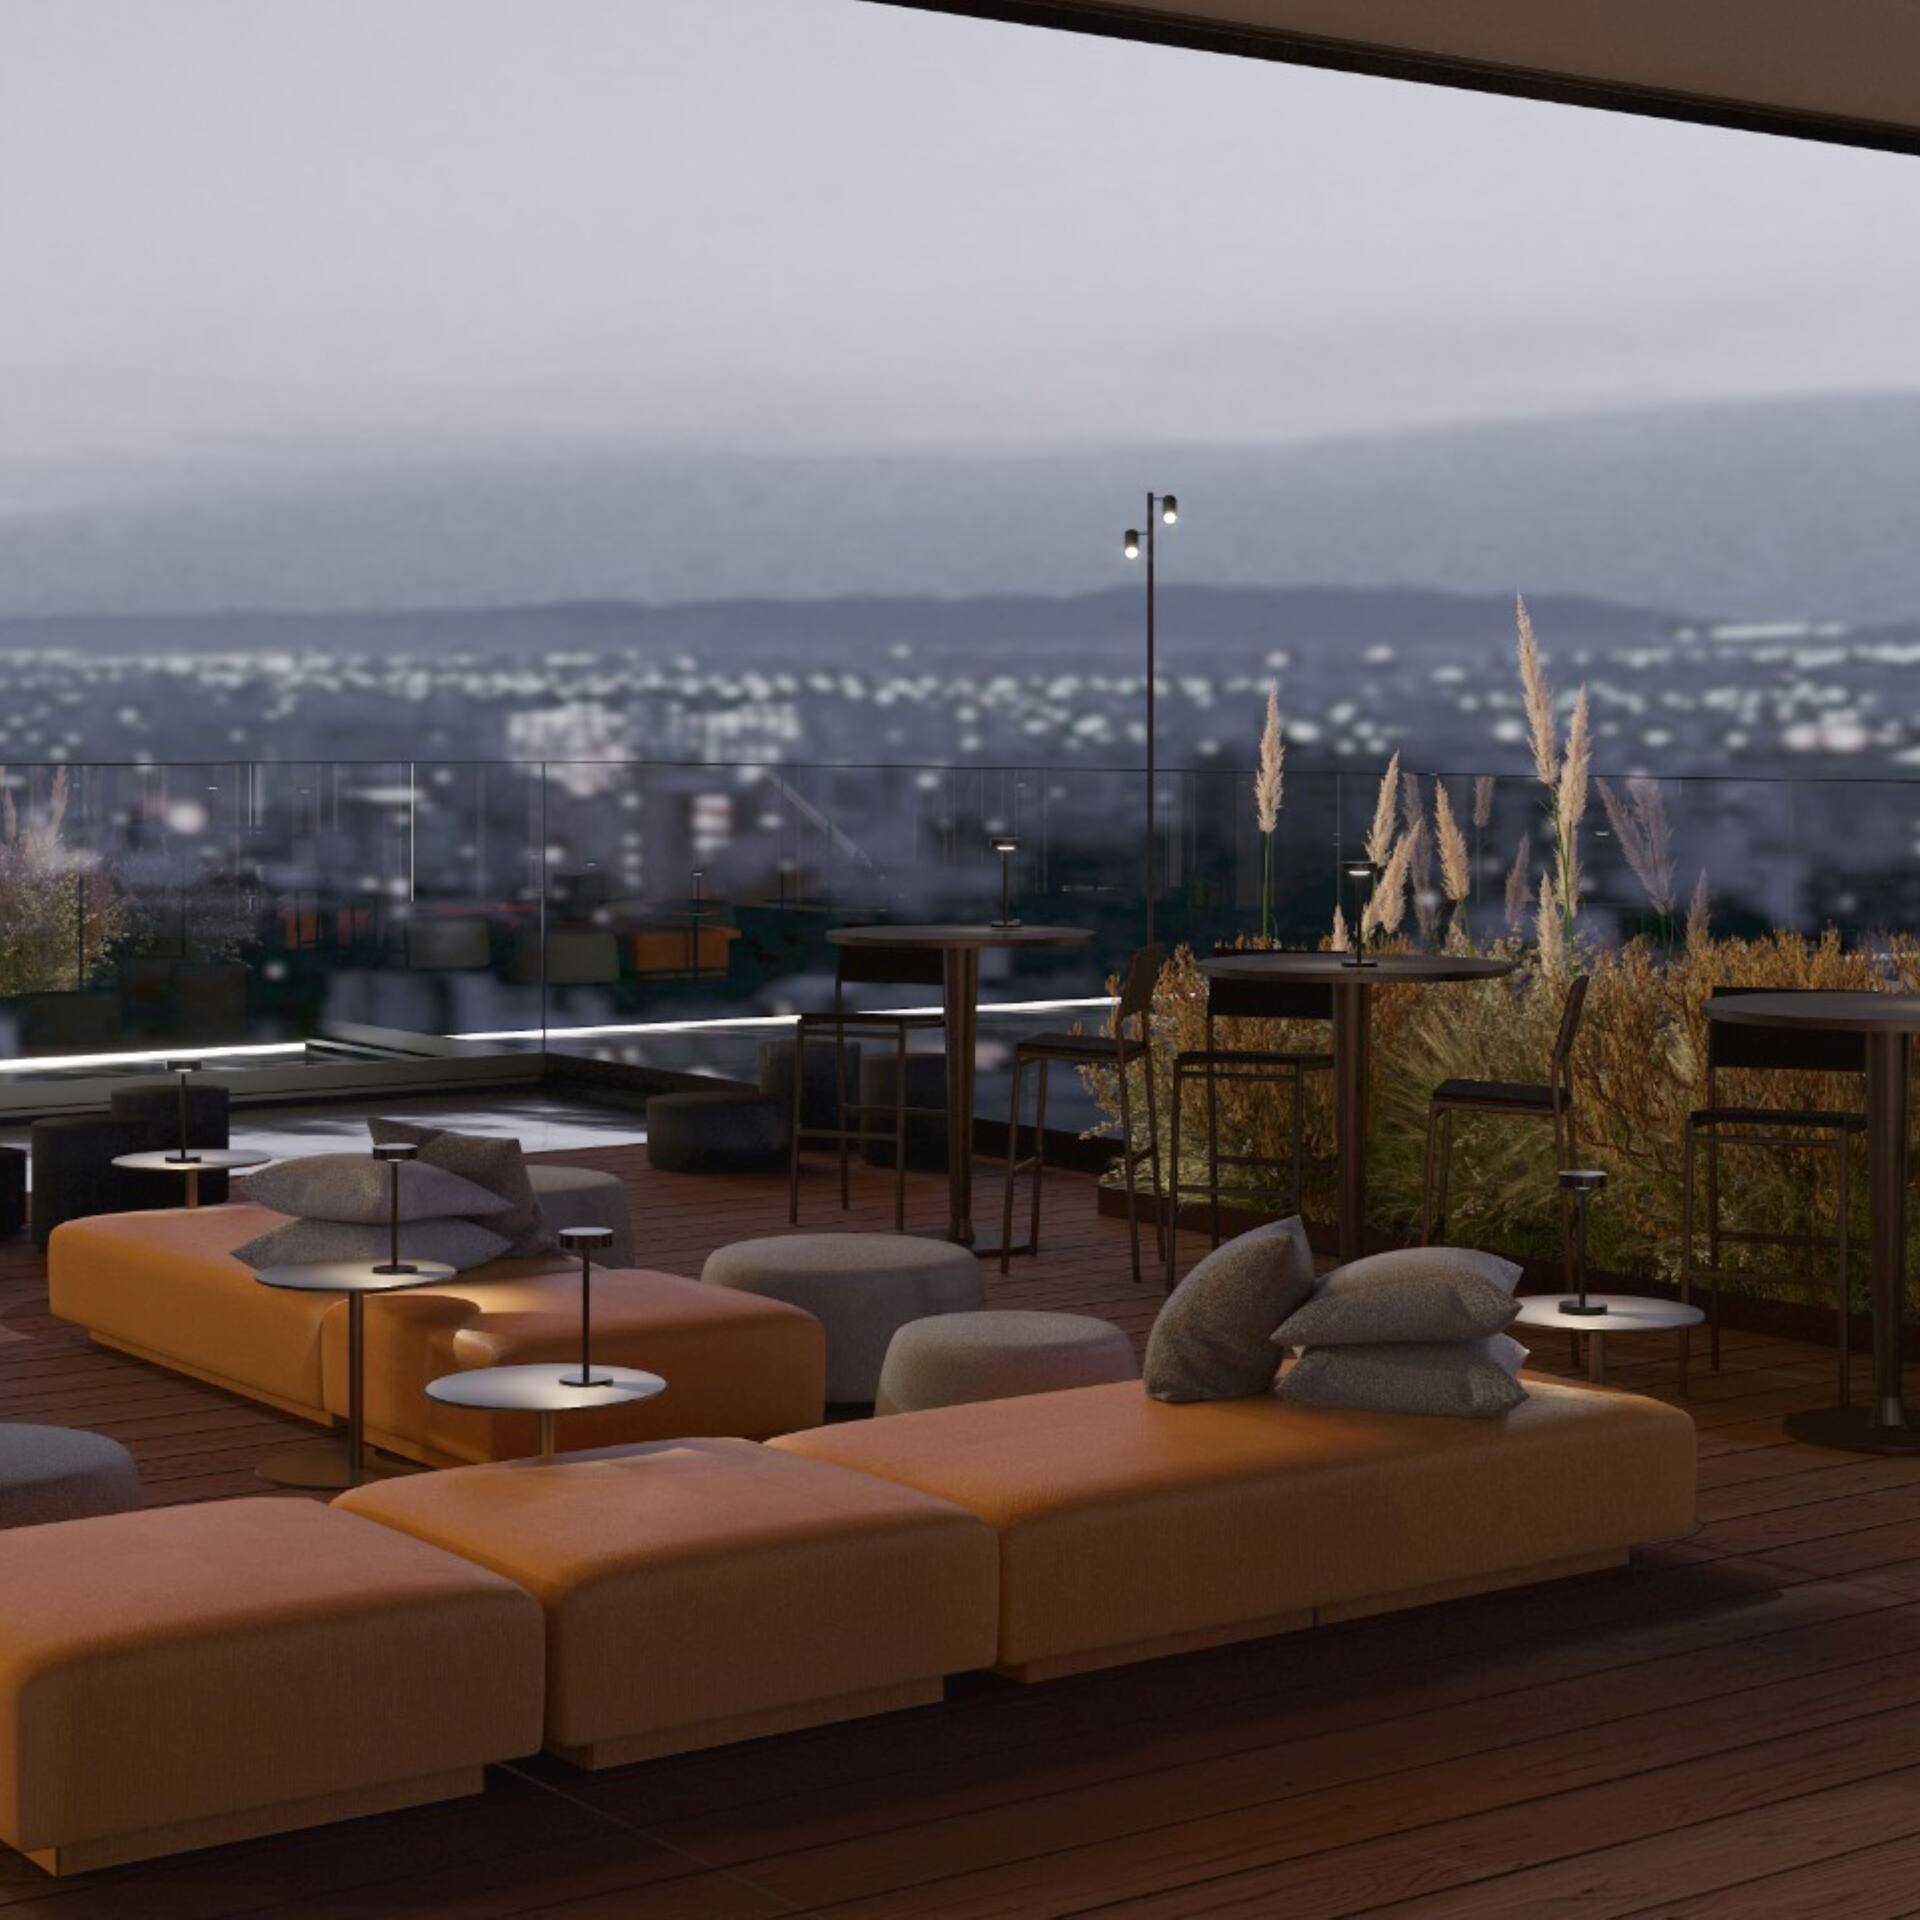 Rooftop with seating and dining tables